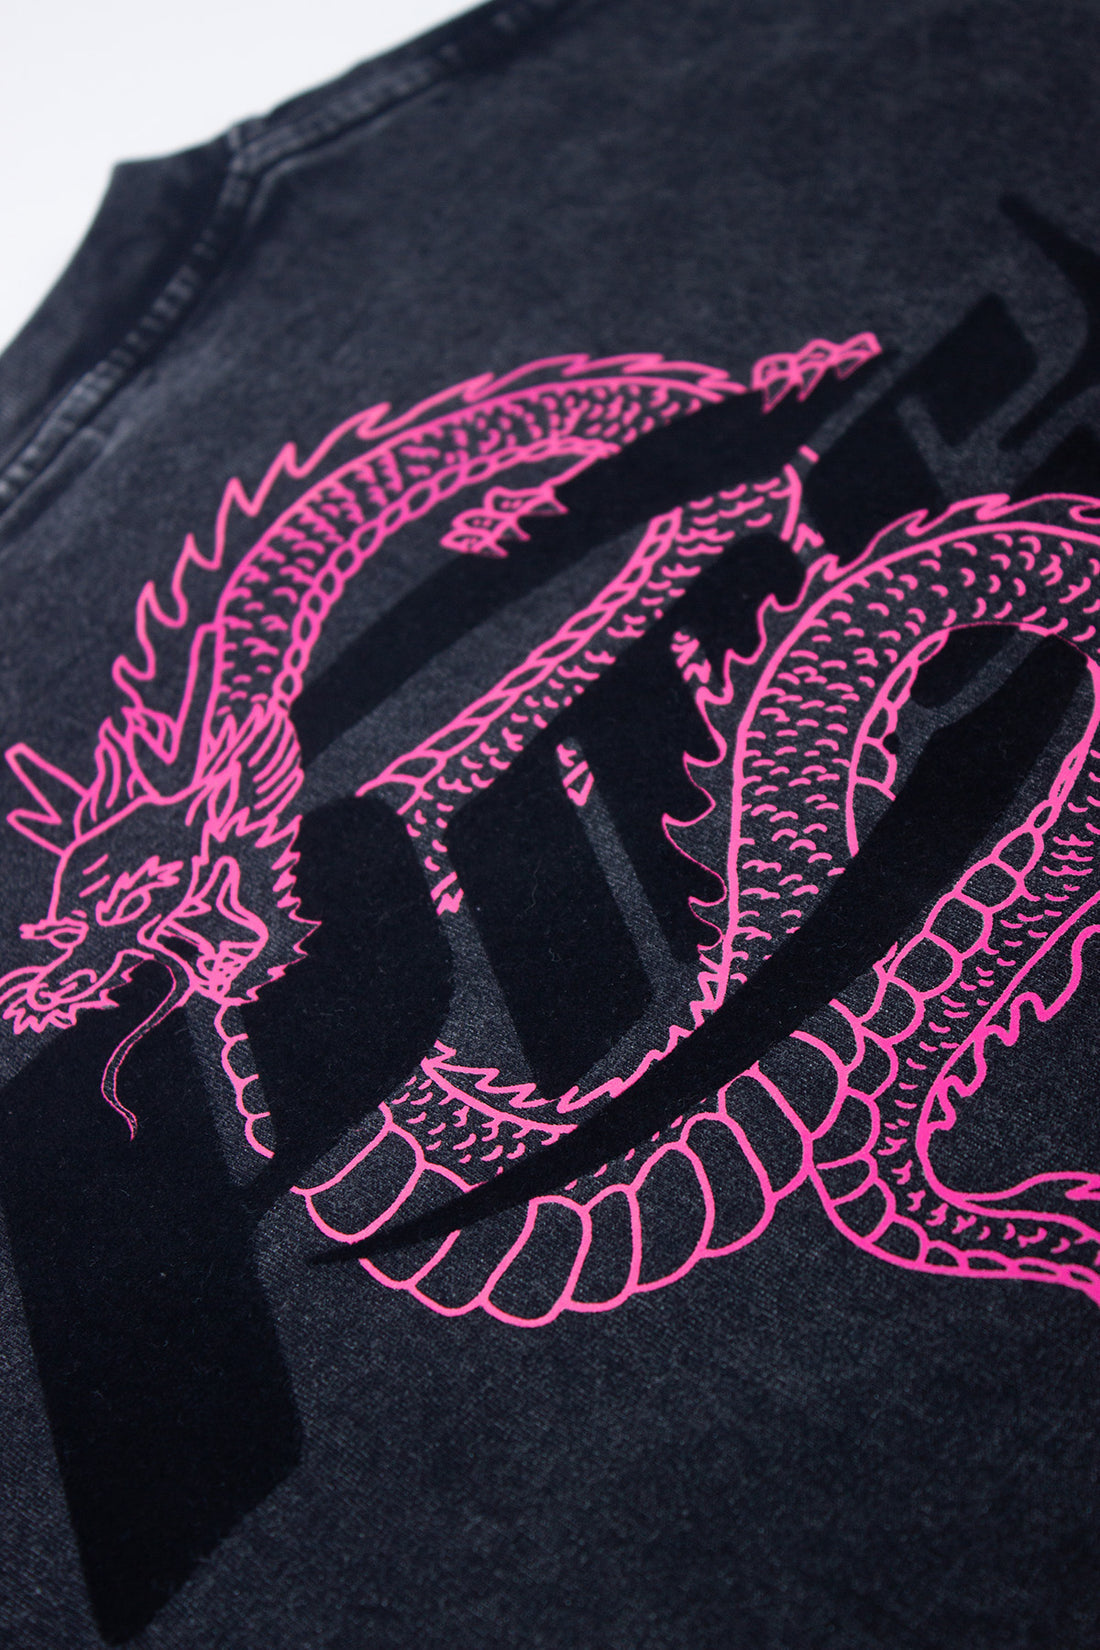 PMC | Y2K Neon Dragon Stone Washed Tee Black